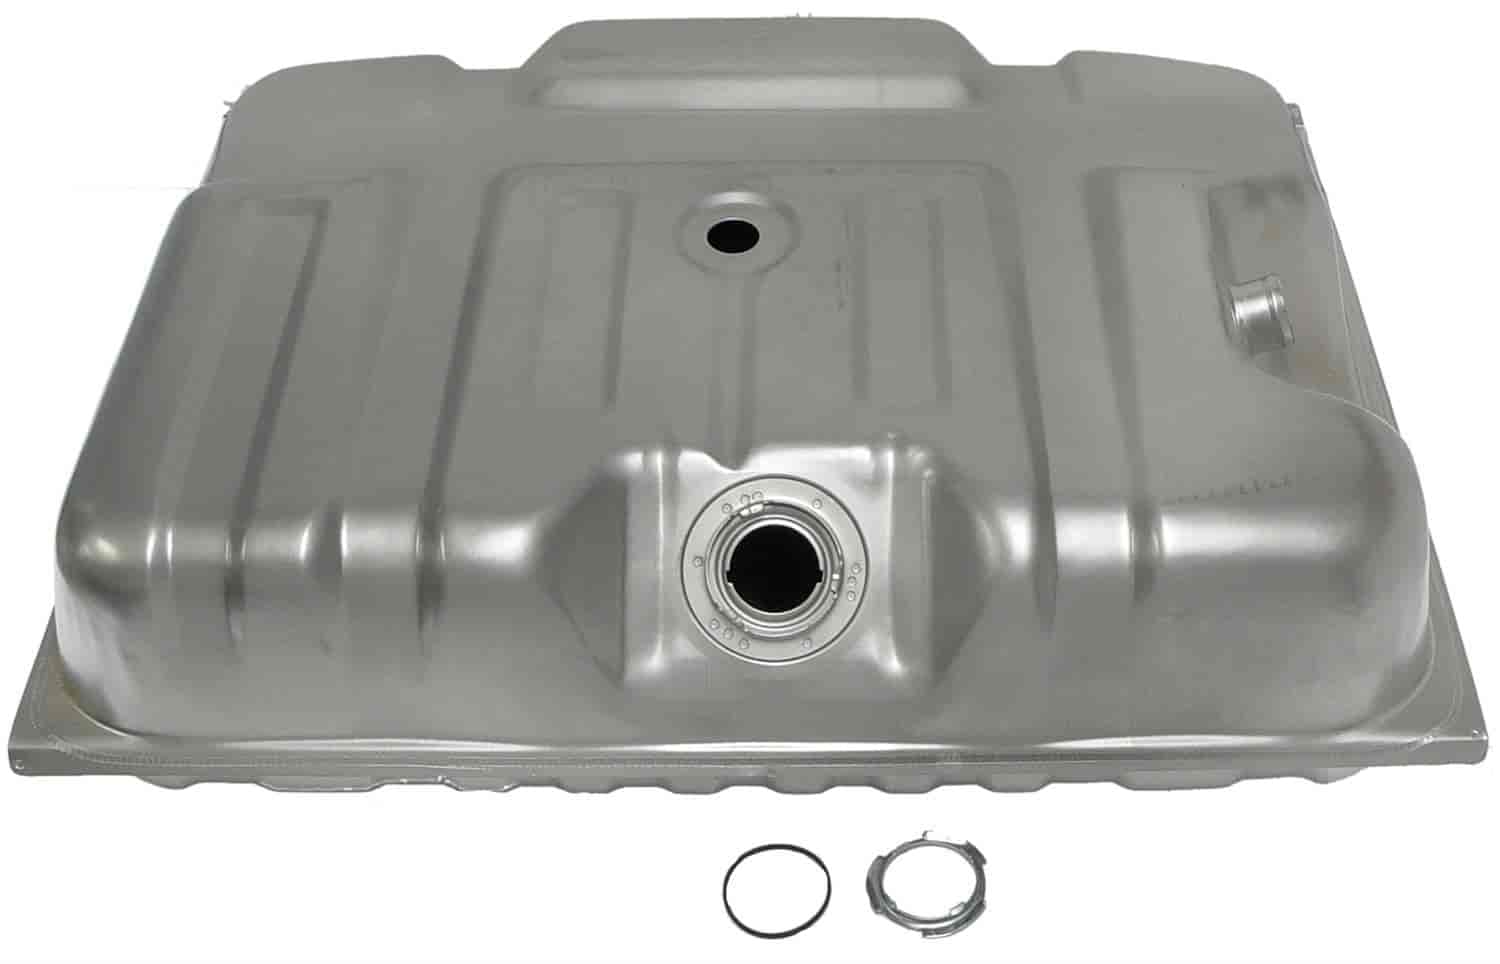 Fuel Tank for 1980-1984 Ford F-Series Truck [19 Gallon]